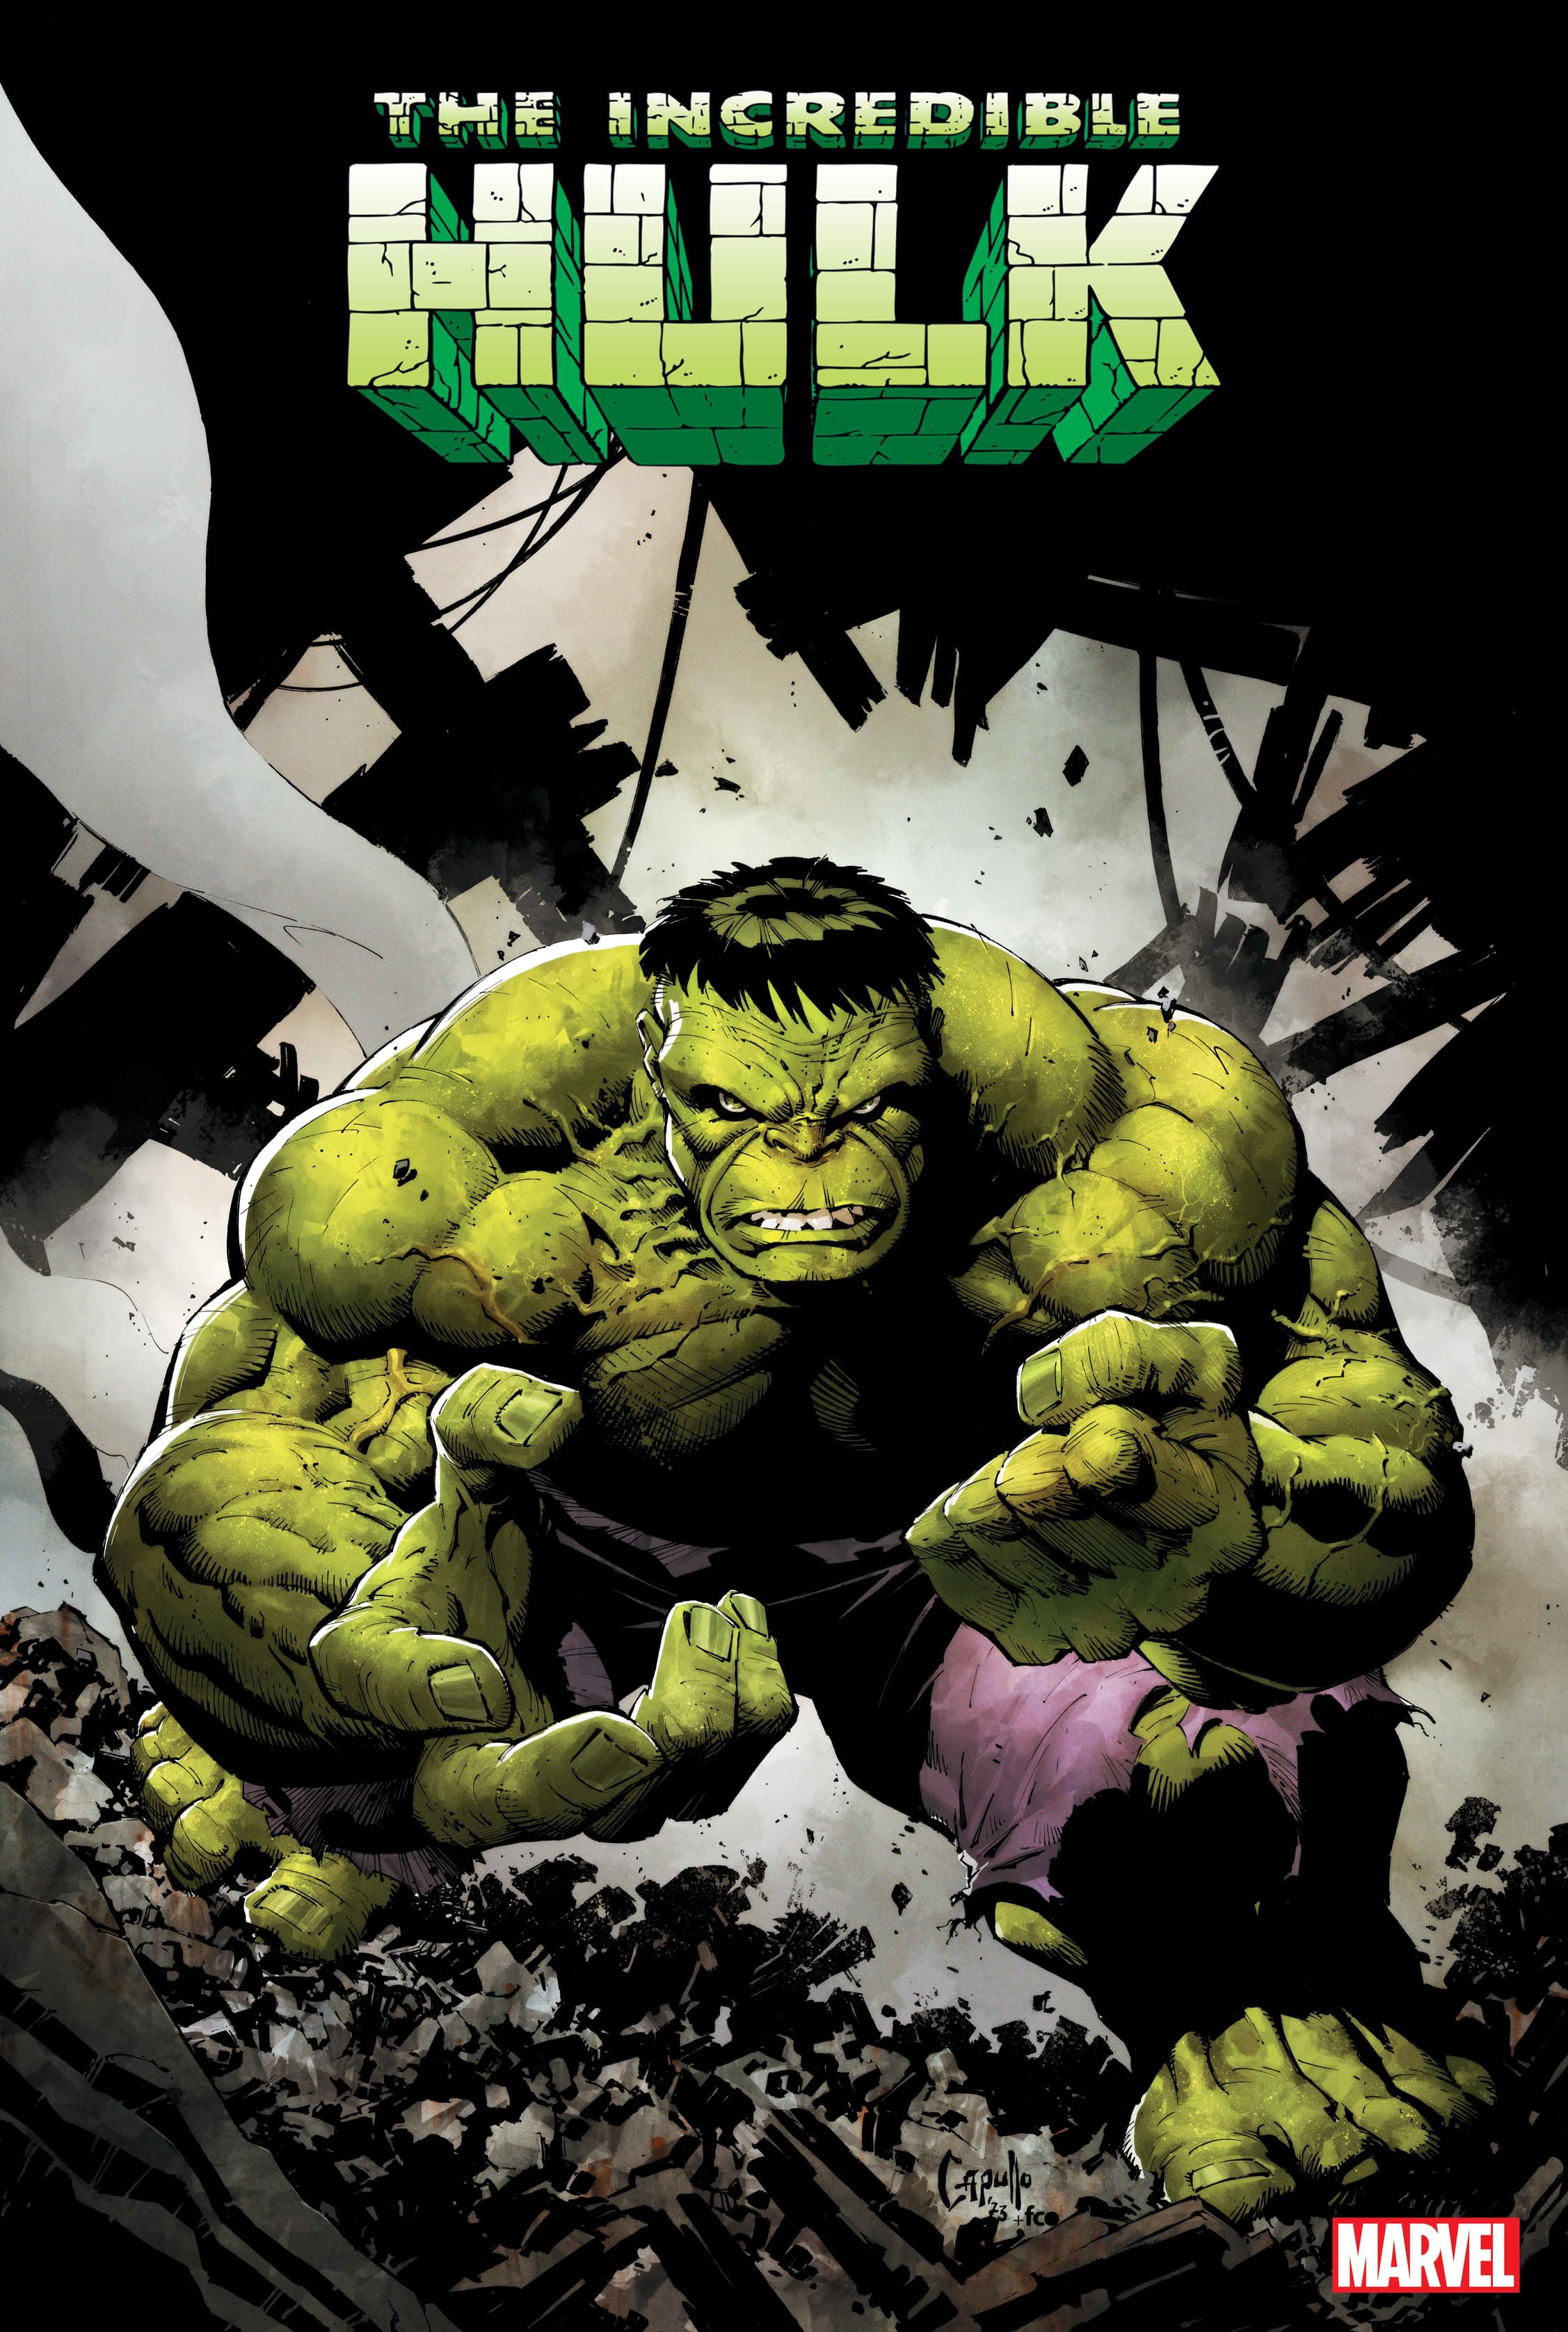 INCREDIBLE HULK #9 variant cover by Greg Capullo